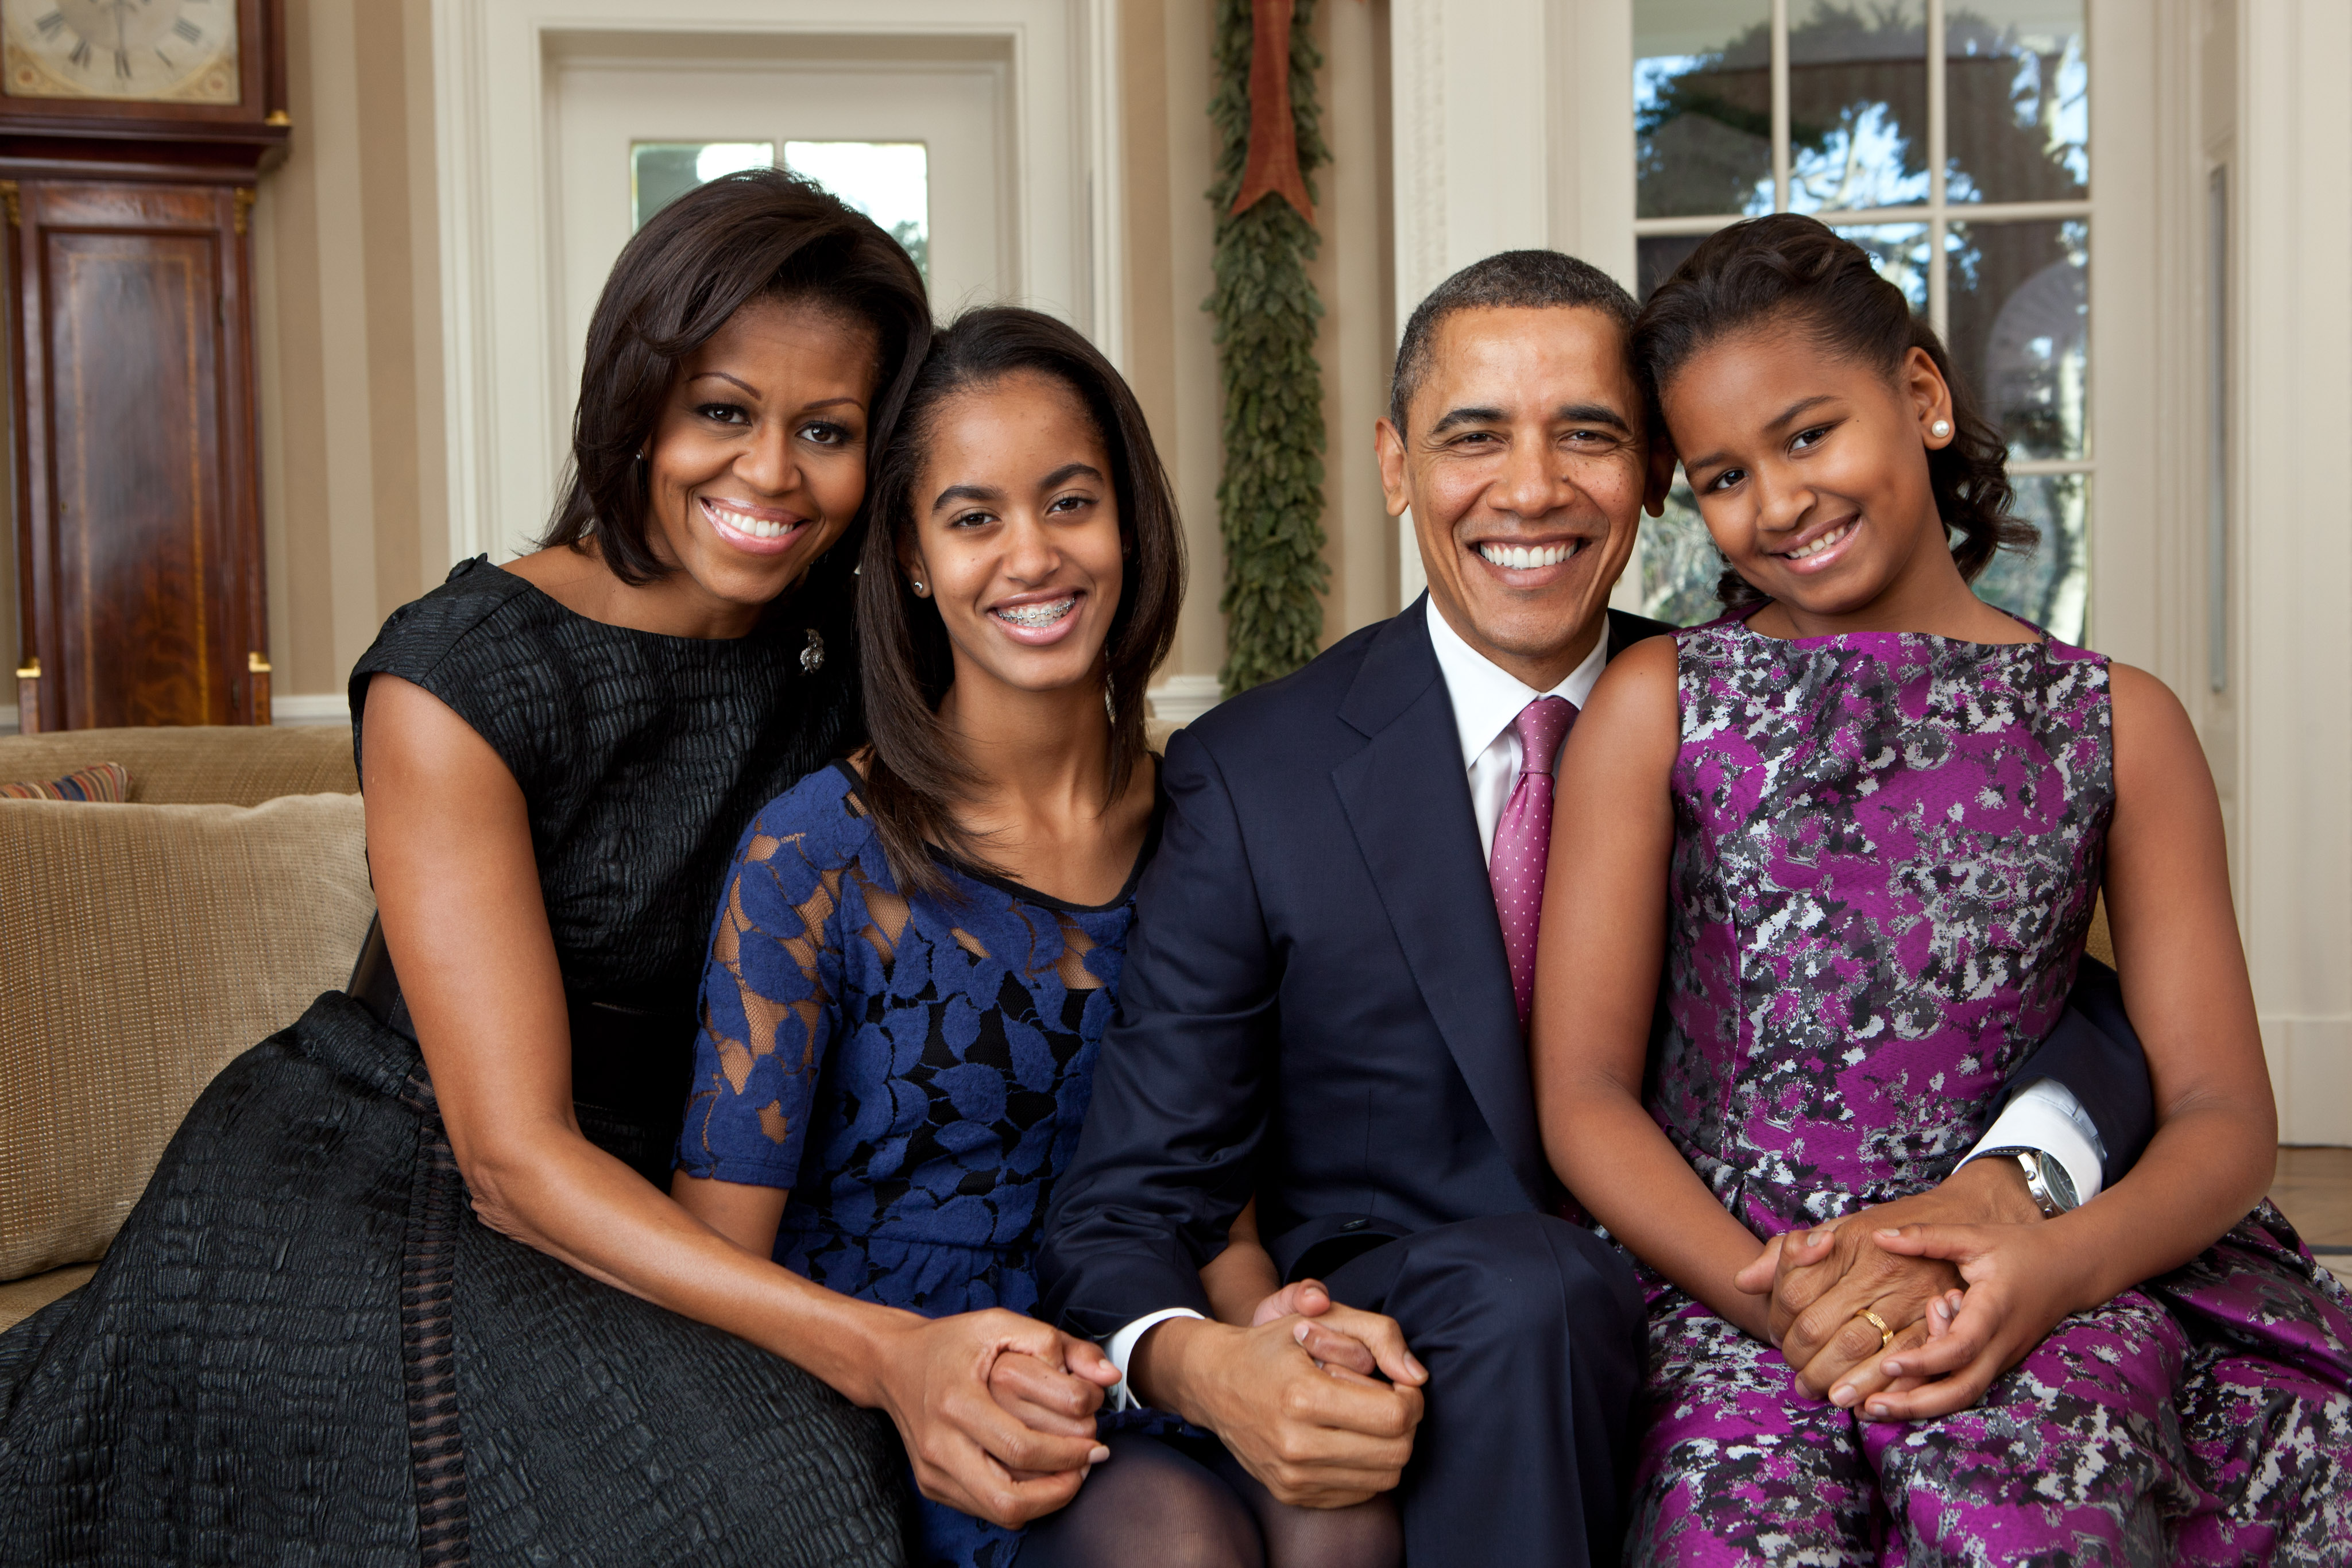 We all know Sasha, Malia, Michelle and Mr. President Barack Obama himself.. But what about his extended family? Slide through and take a look at some of his extended family.